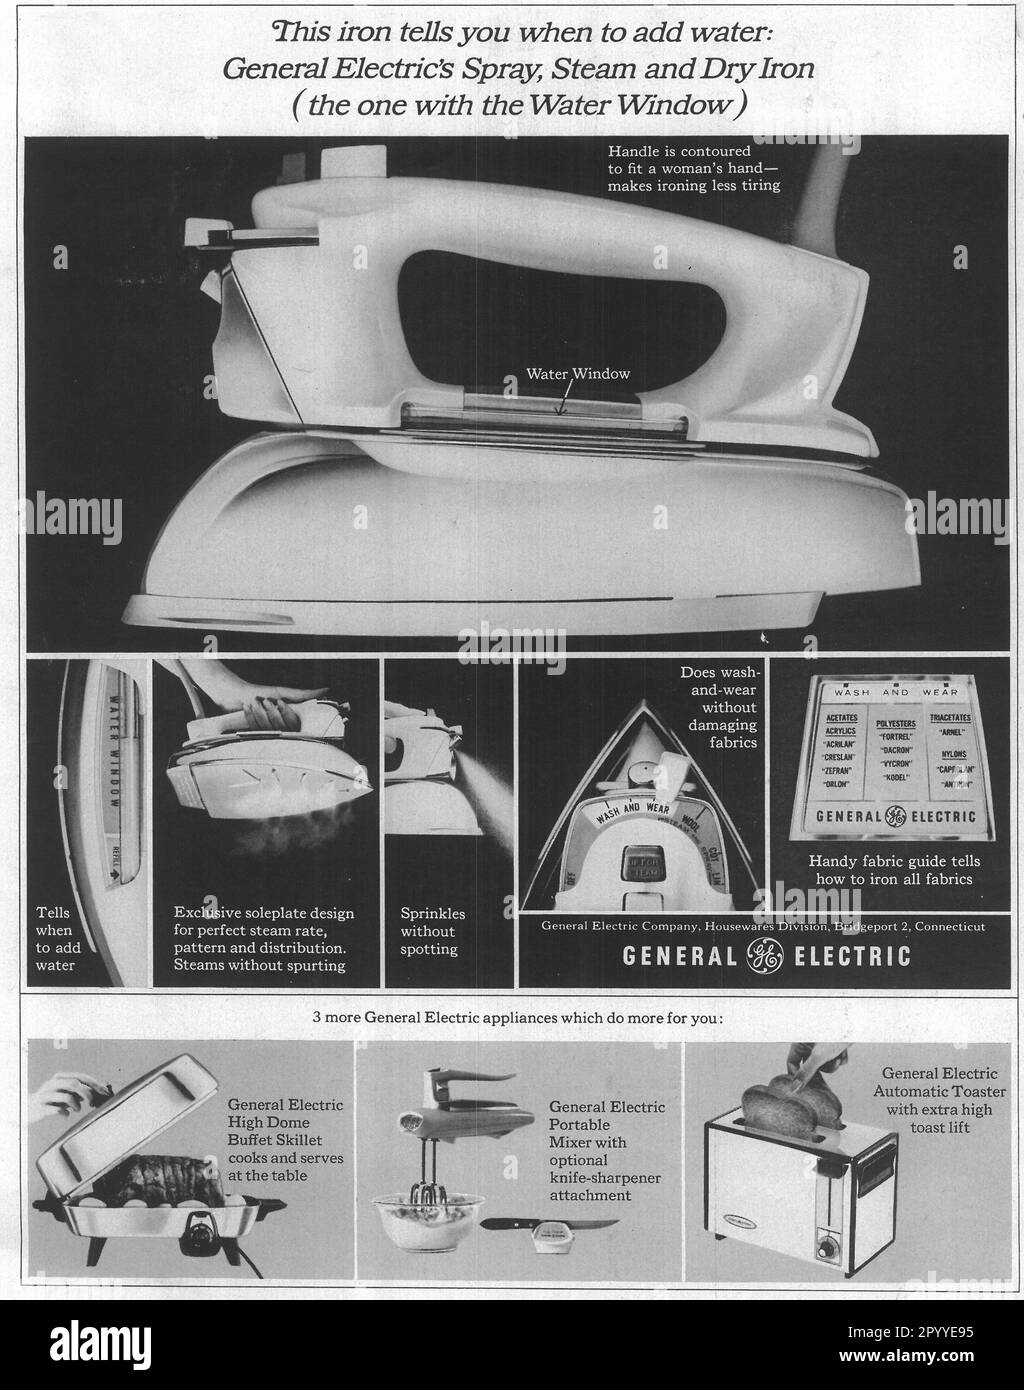 General Electric Steam Iron advert in a Journal magazine, February 1965 Stock Photo